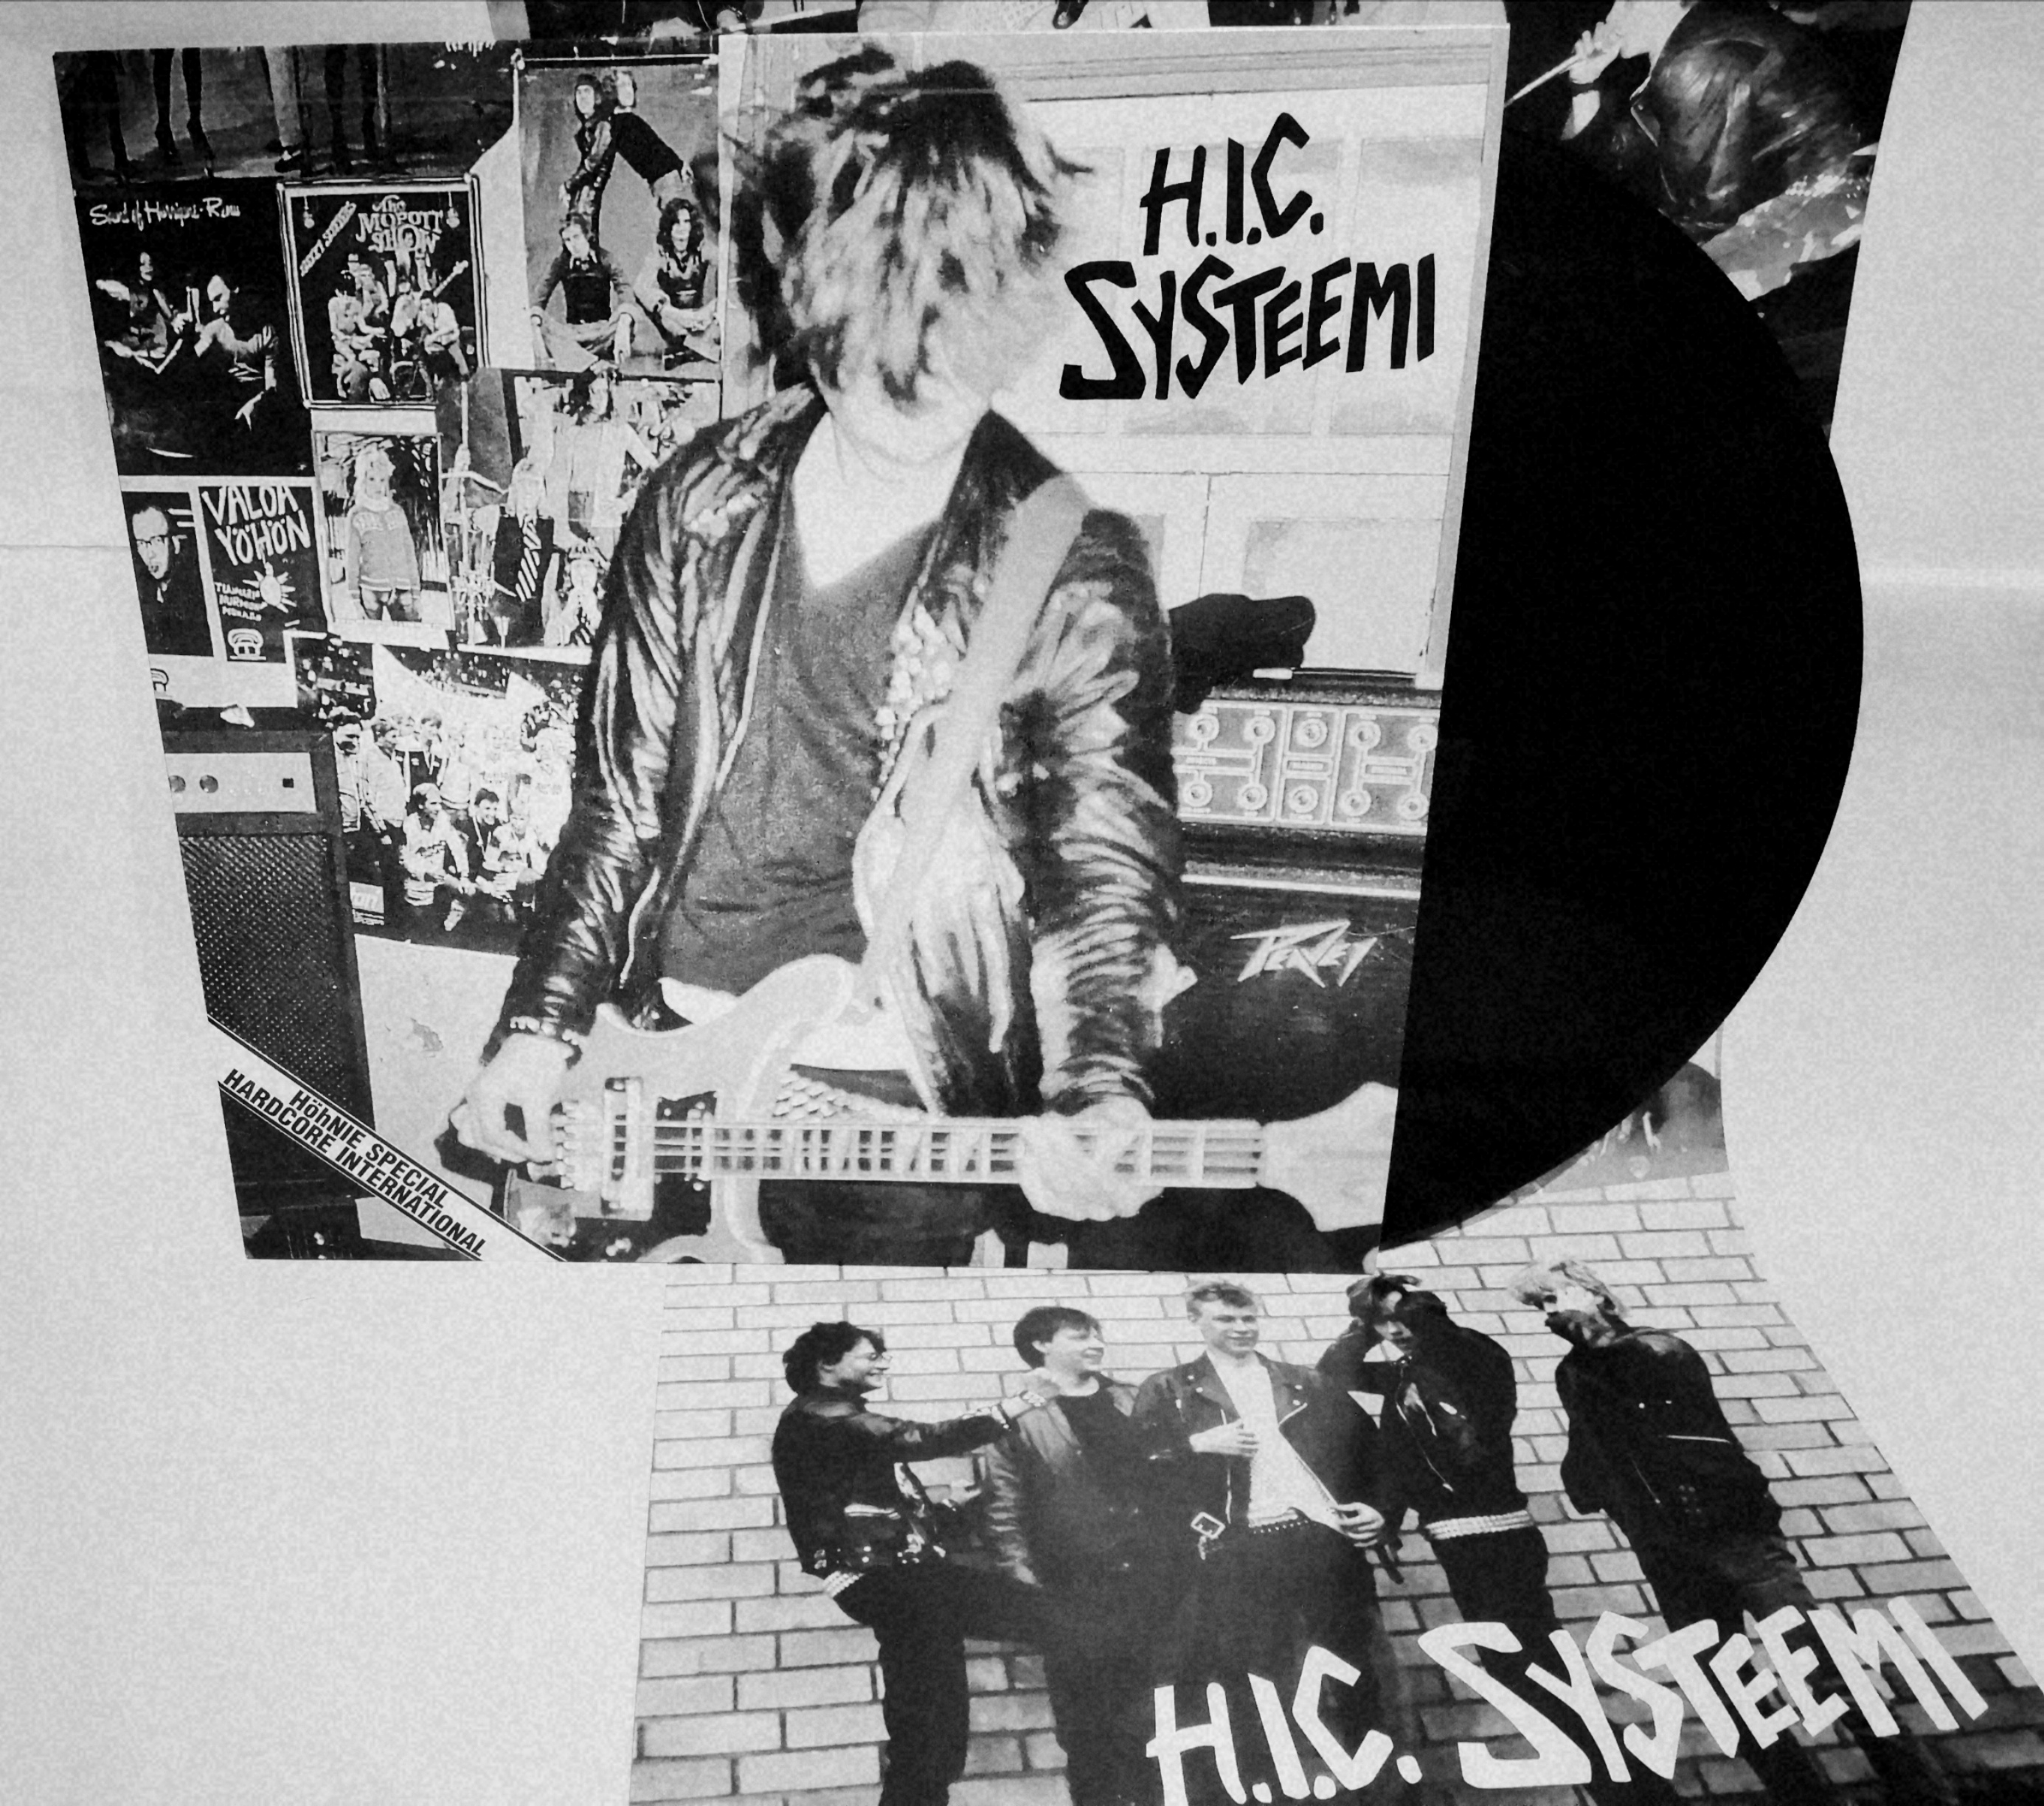 H.I.C. Systeemi - Total Blackout LP